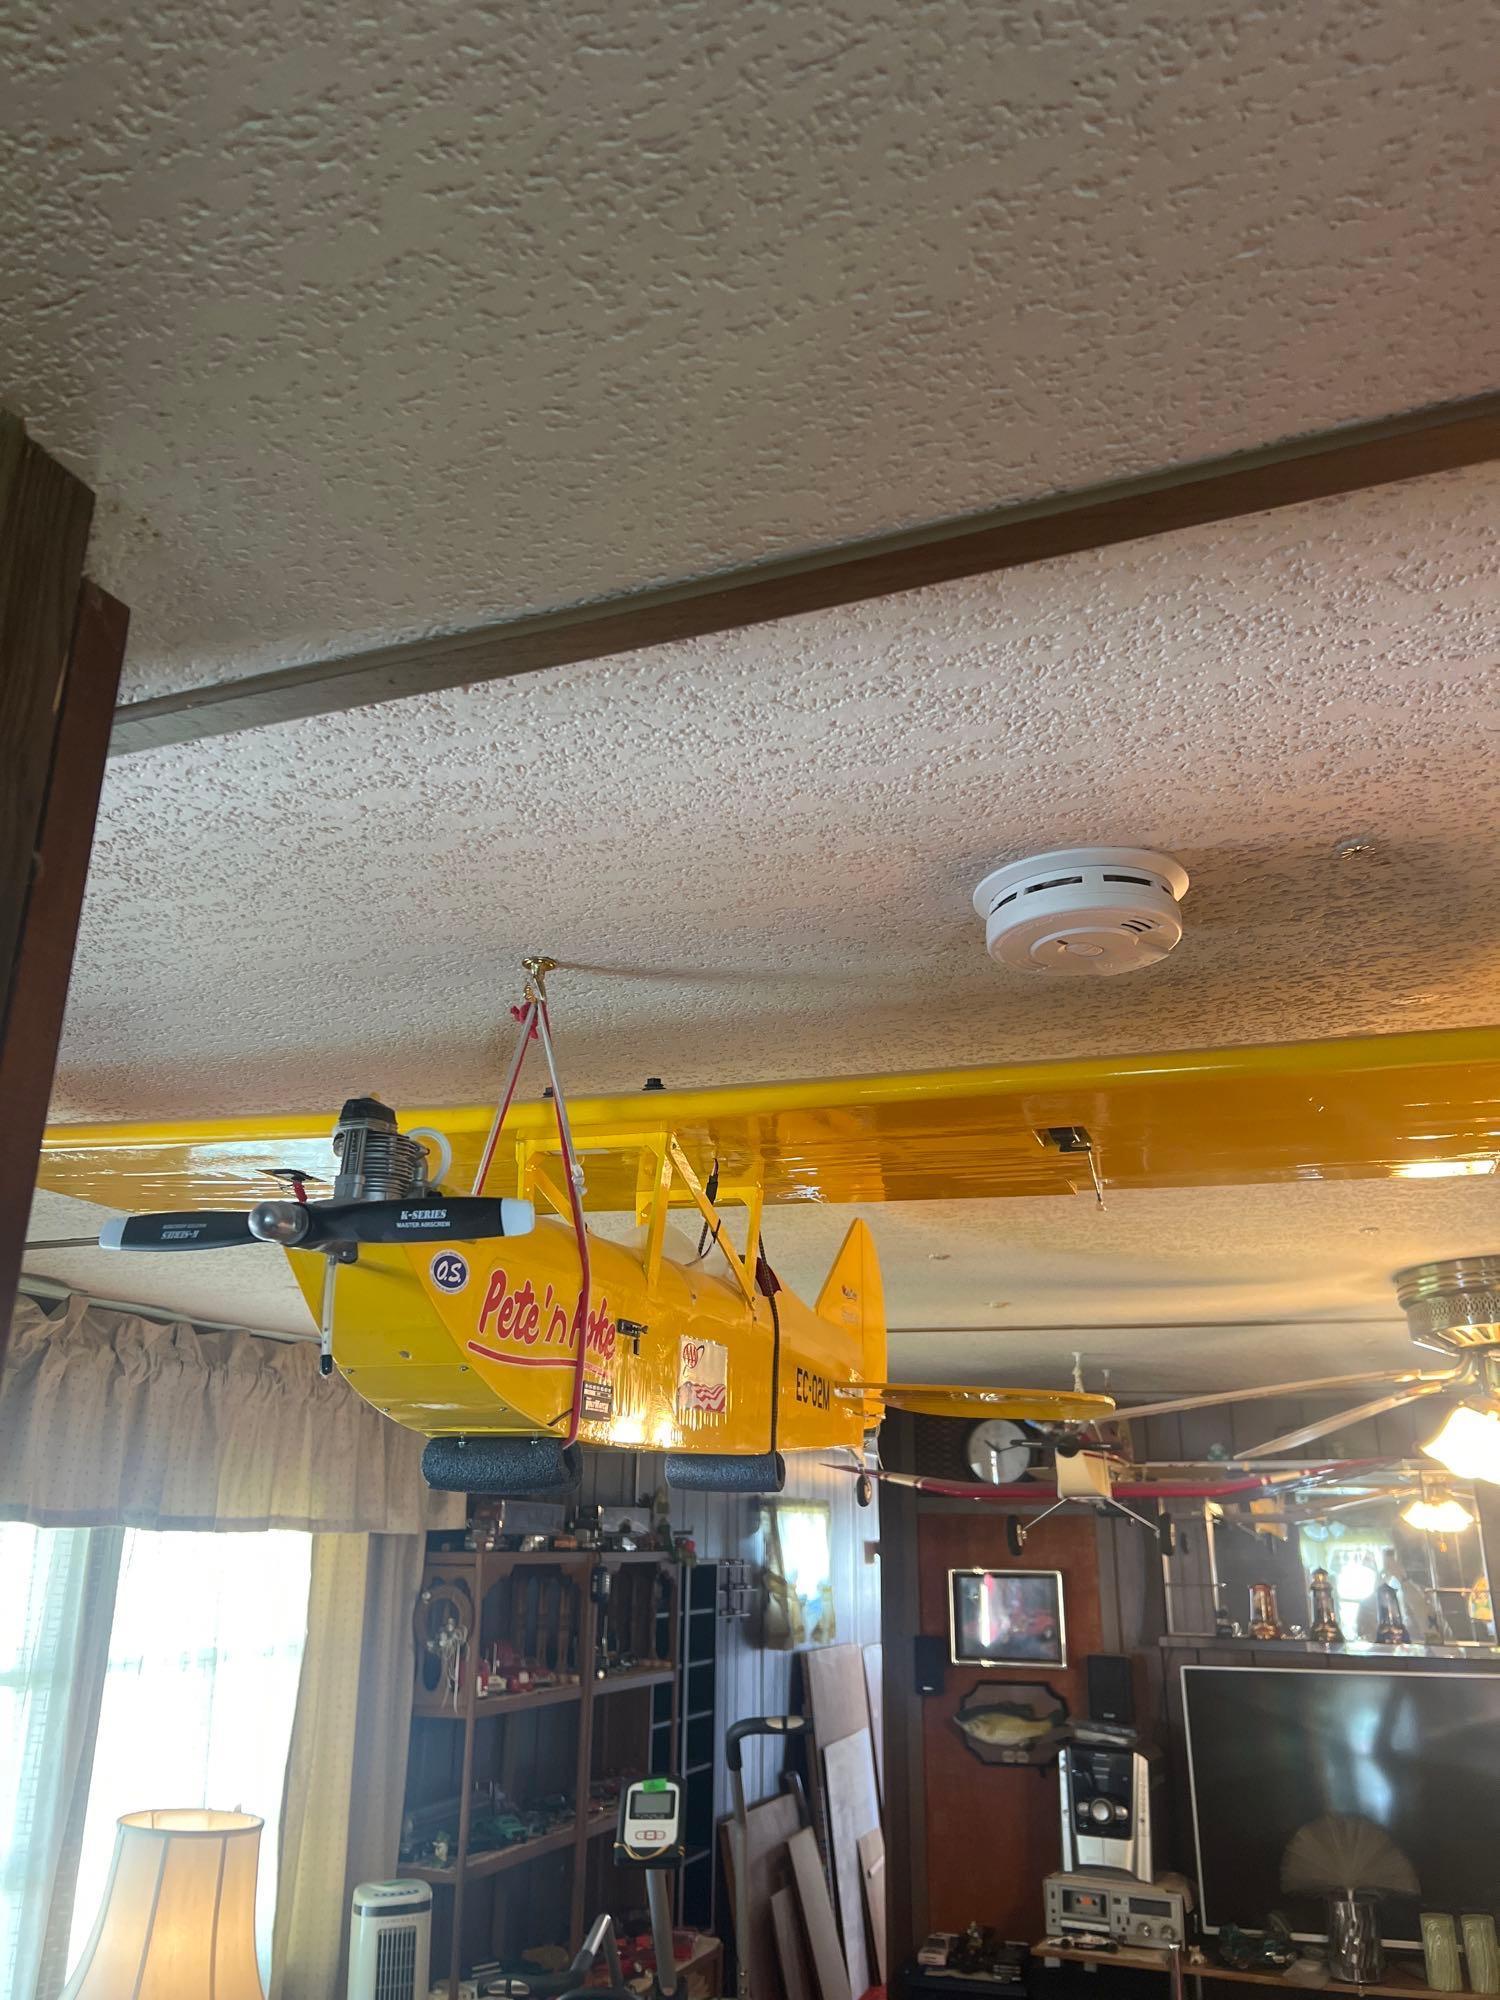 Remote controlled Air Plane Yellow